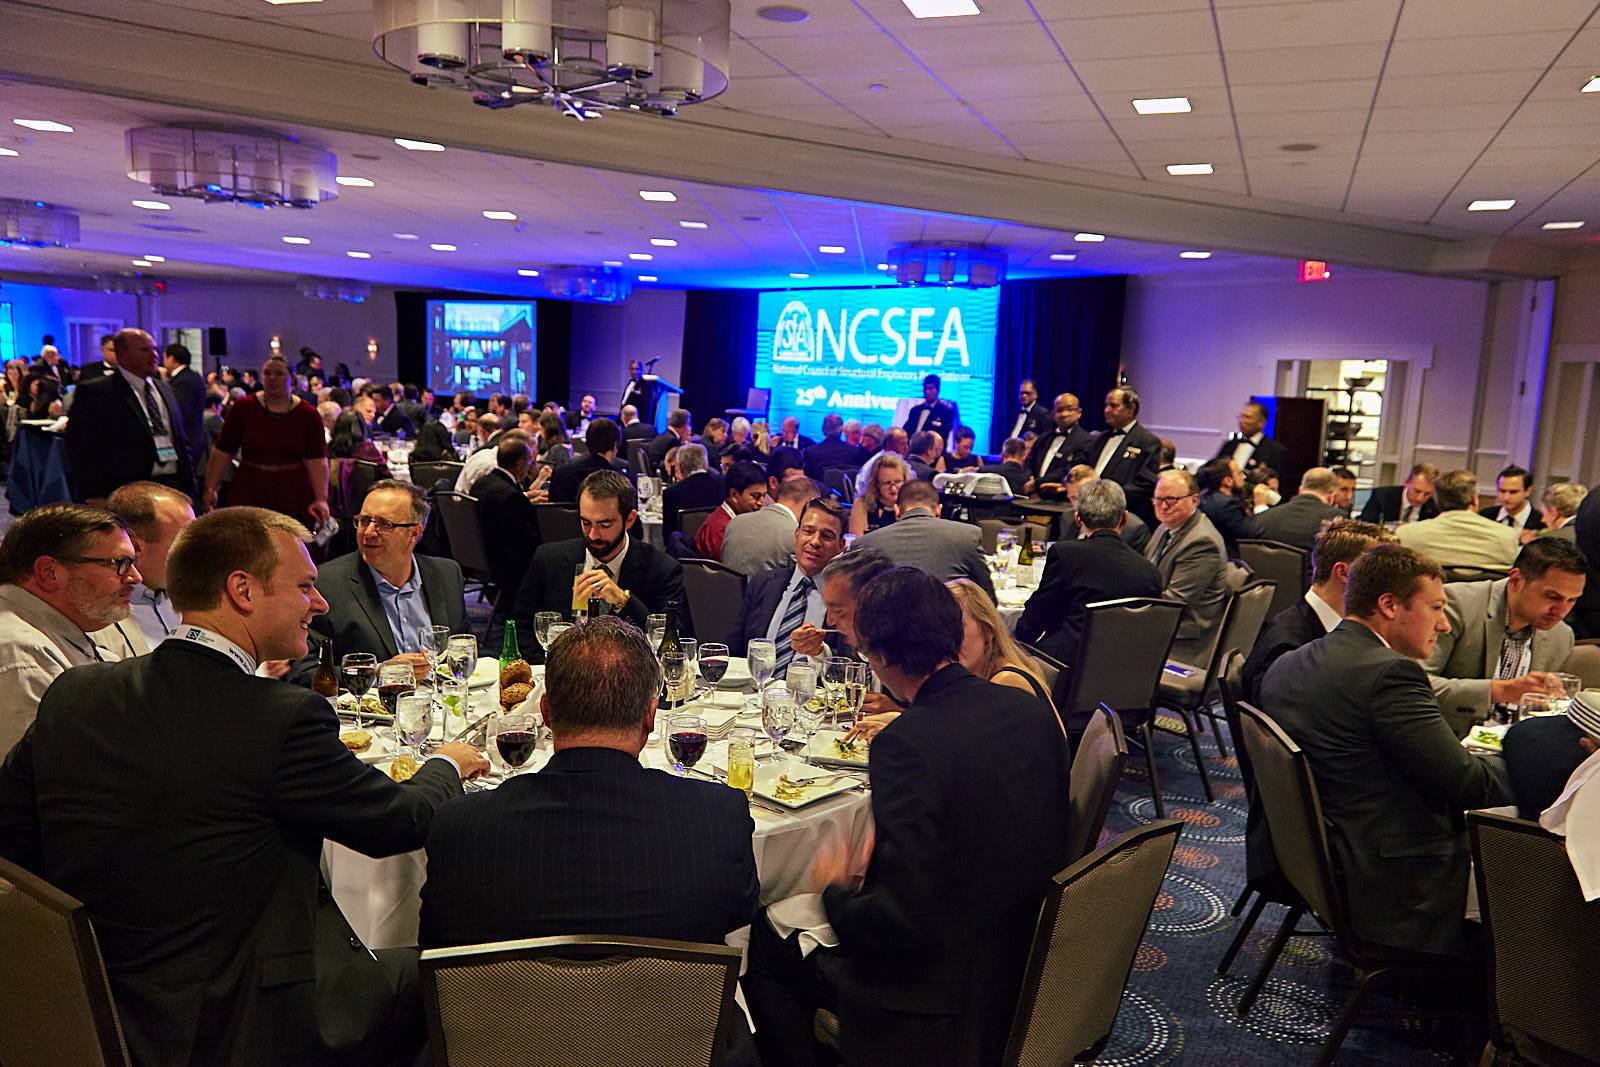 Attendees at the 2017 NCSEA Awards Banquet honoring winners of the Excellence in Structural Engineering Awards